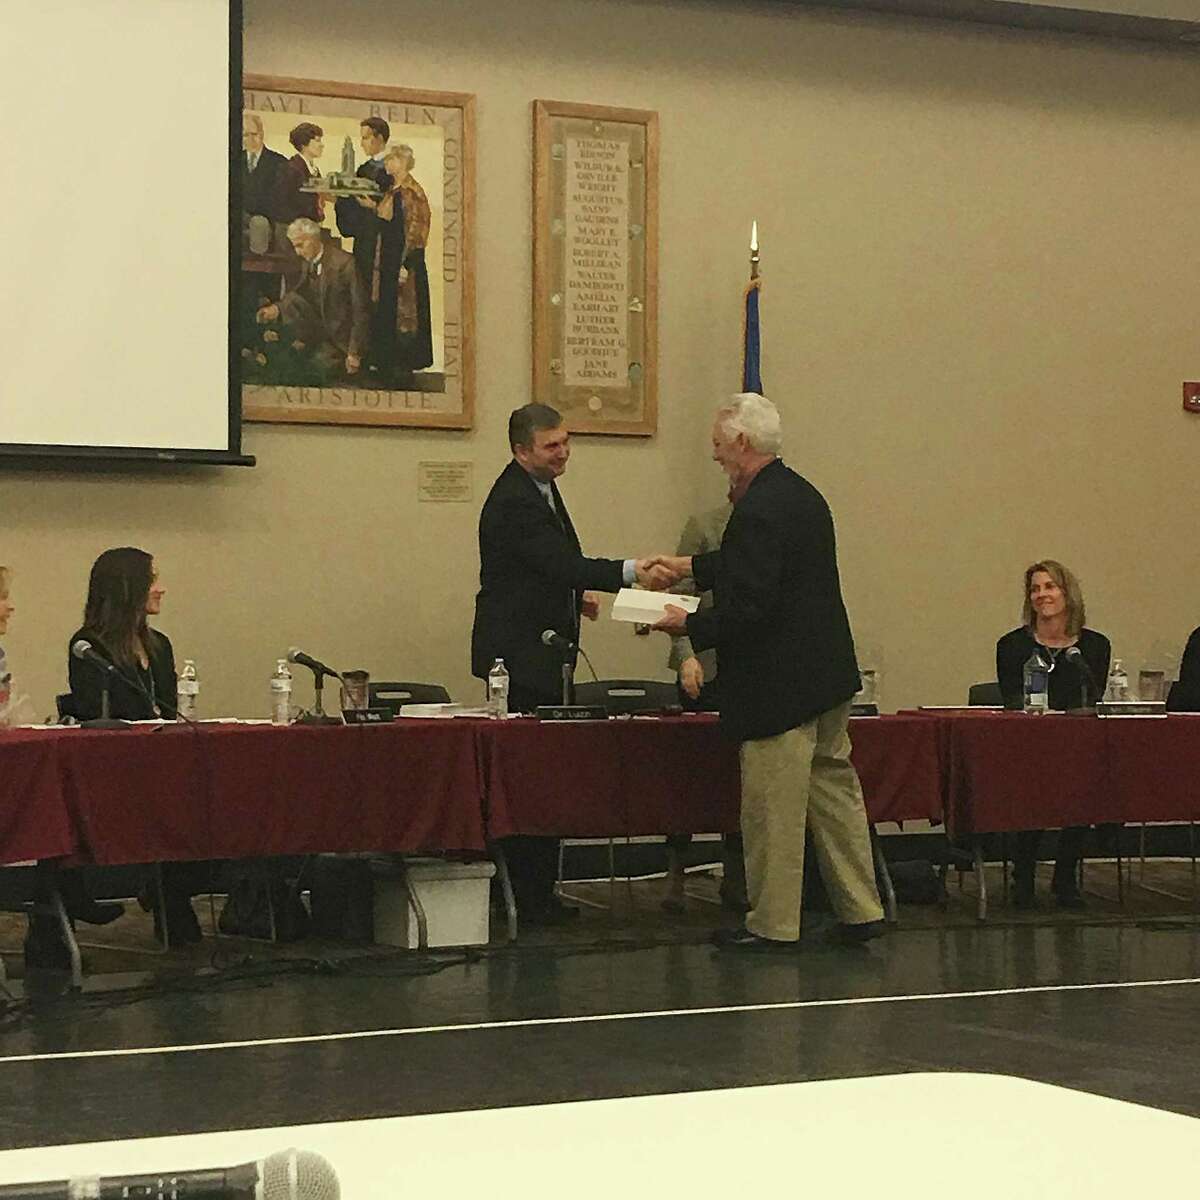 Bob Willoughby, outgoing manager of facilities operations at New Canaan, CT public schools, accepts an award of acknowledgement from superintendent Bryan Luizzi at a school board meeting on March 27, 2017.